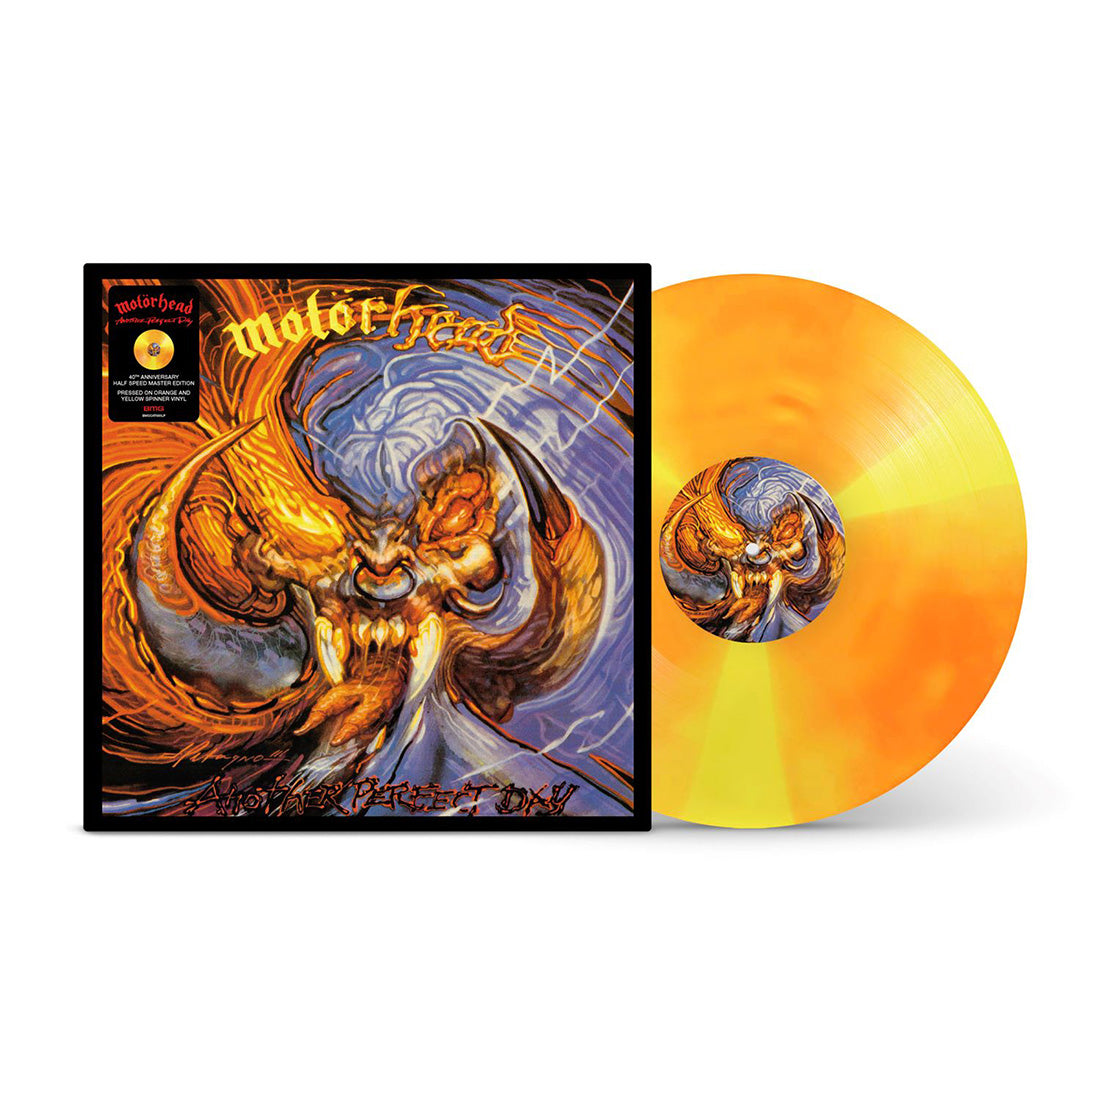 Motorhead - Another Perfect Day (40th Anniversary - Deluxe Edition): Yellow Splatter Vinyl LP